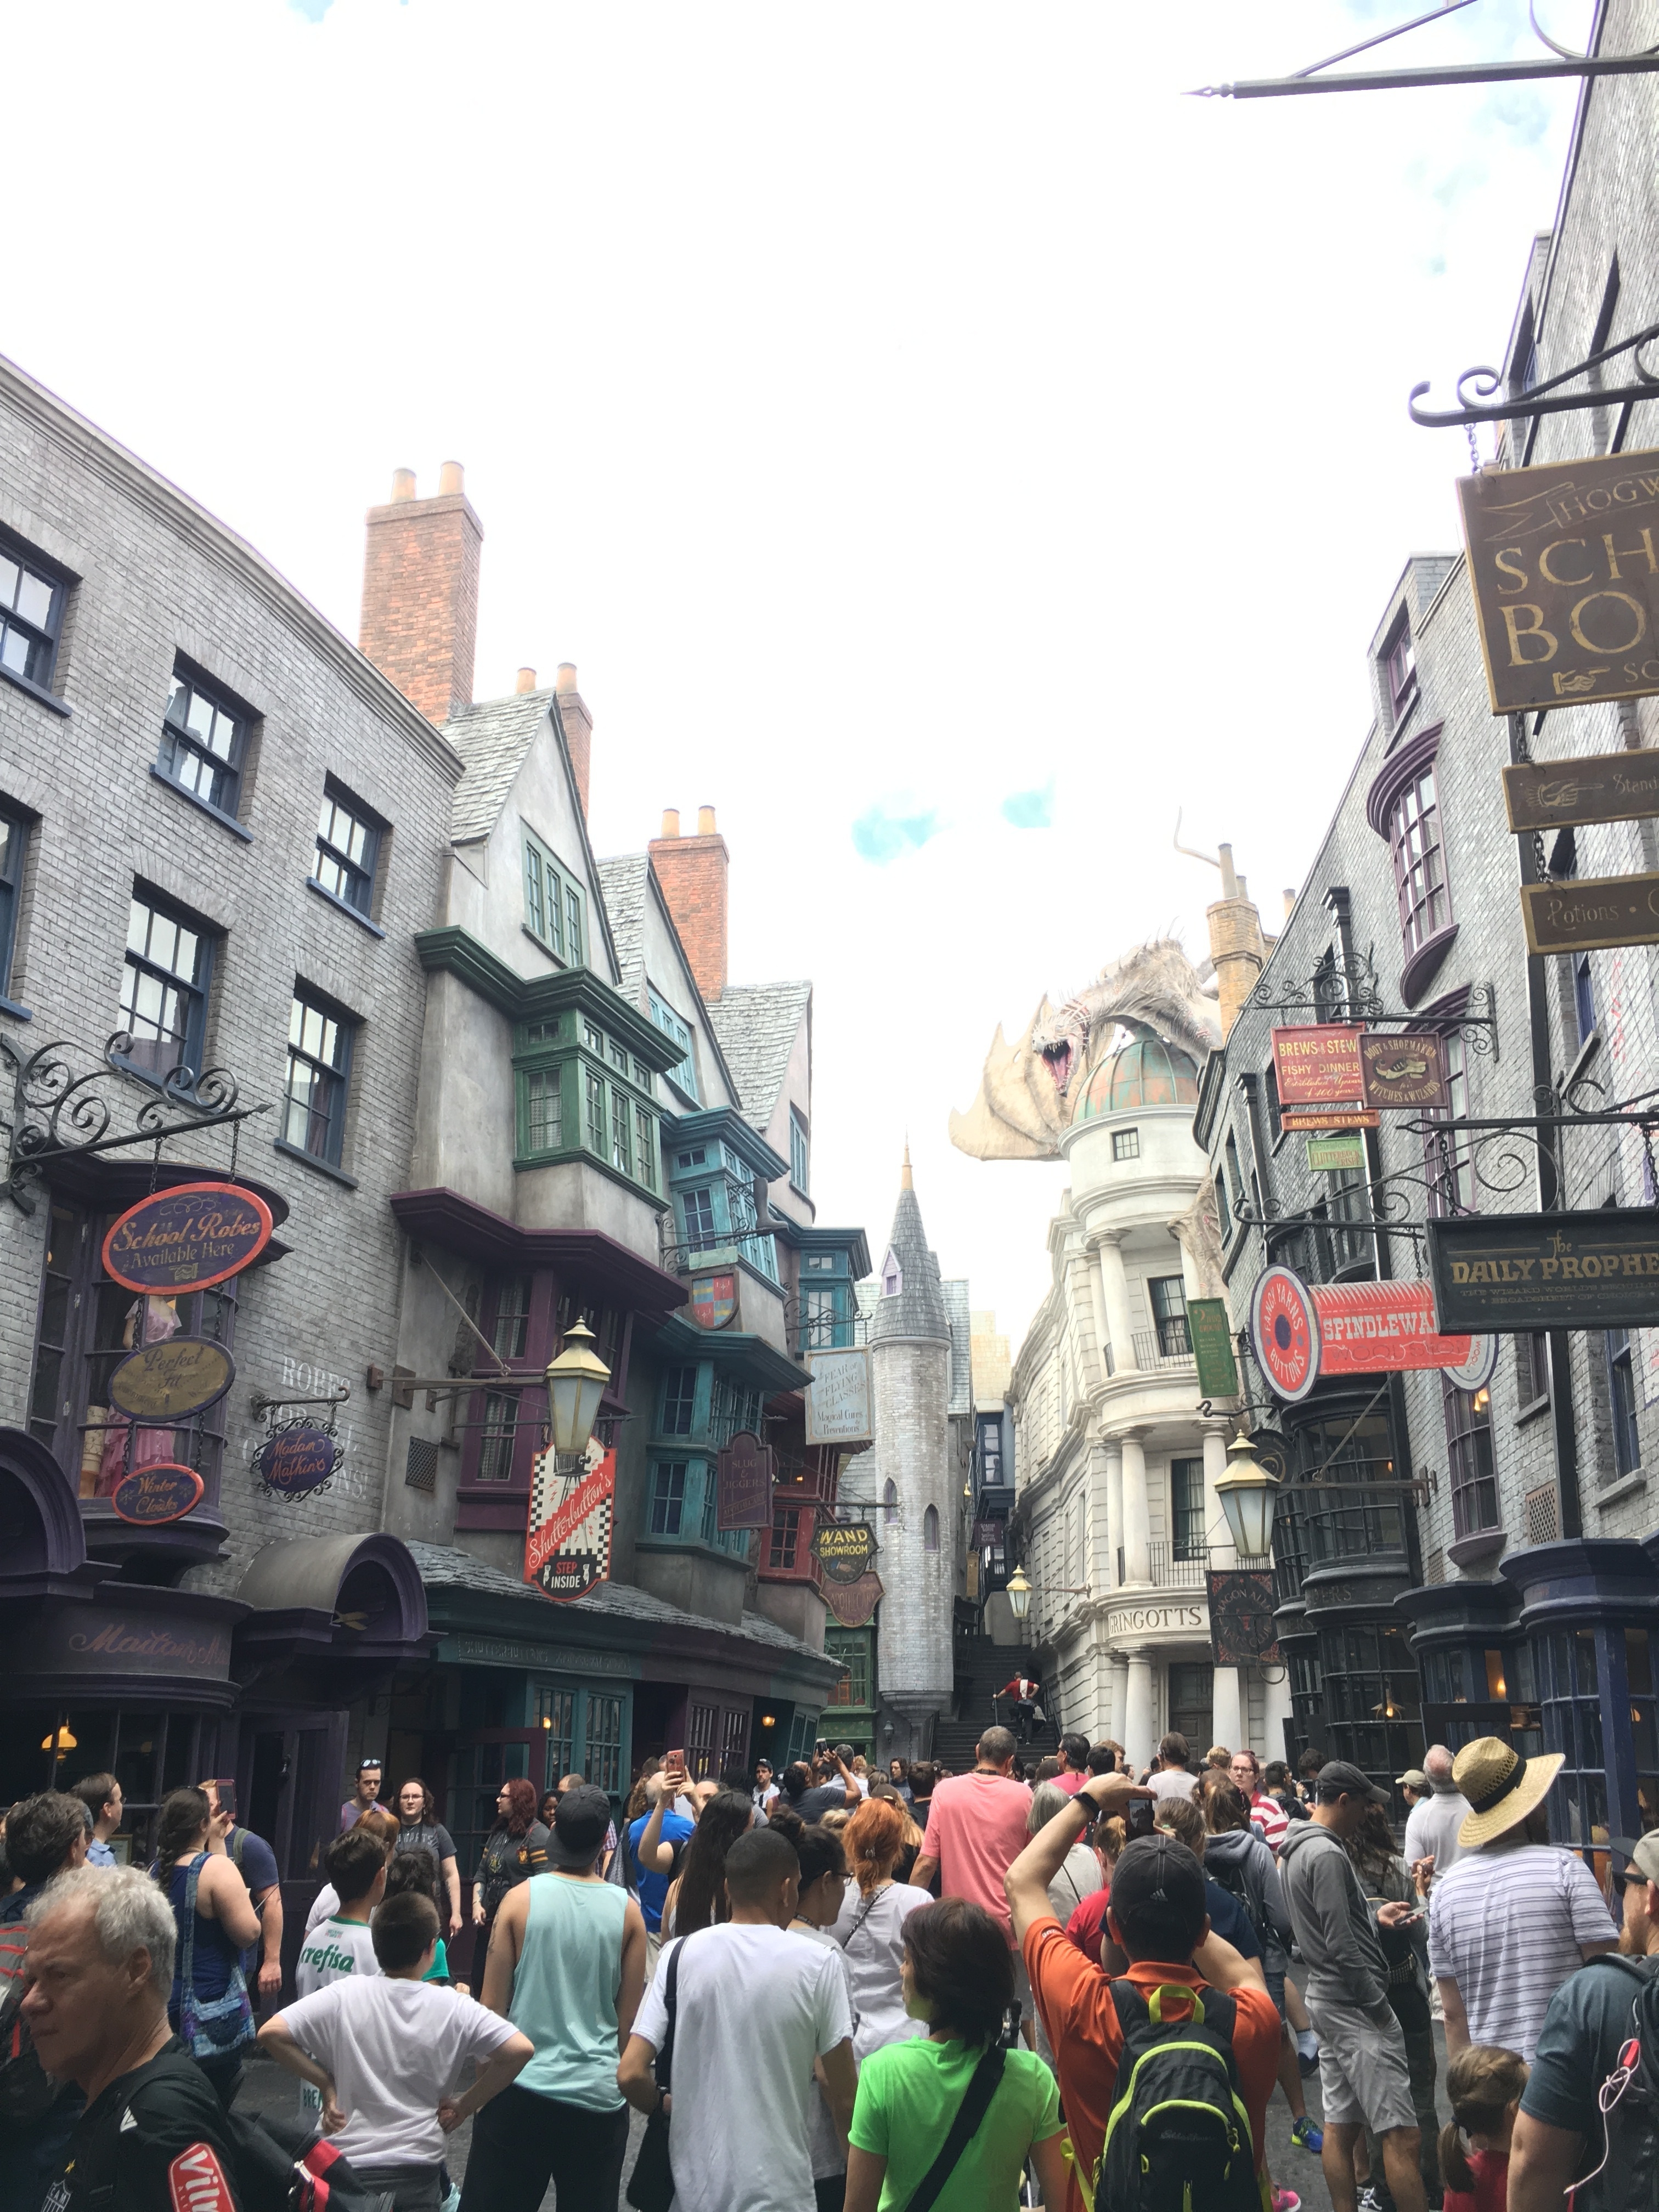 Diagon Alley in Harry Potter World